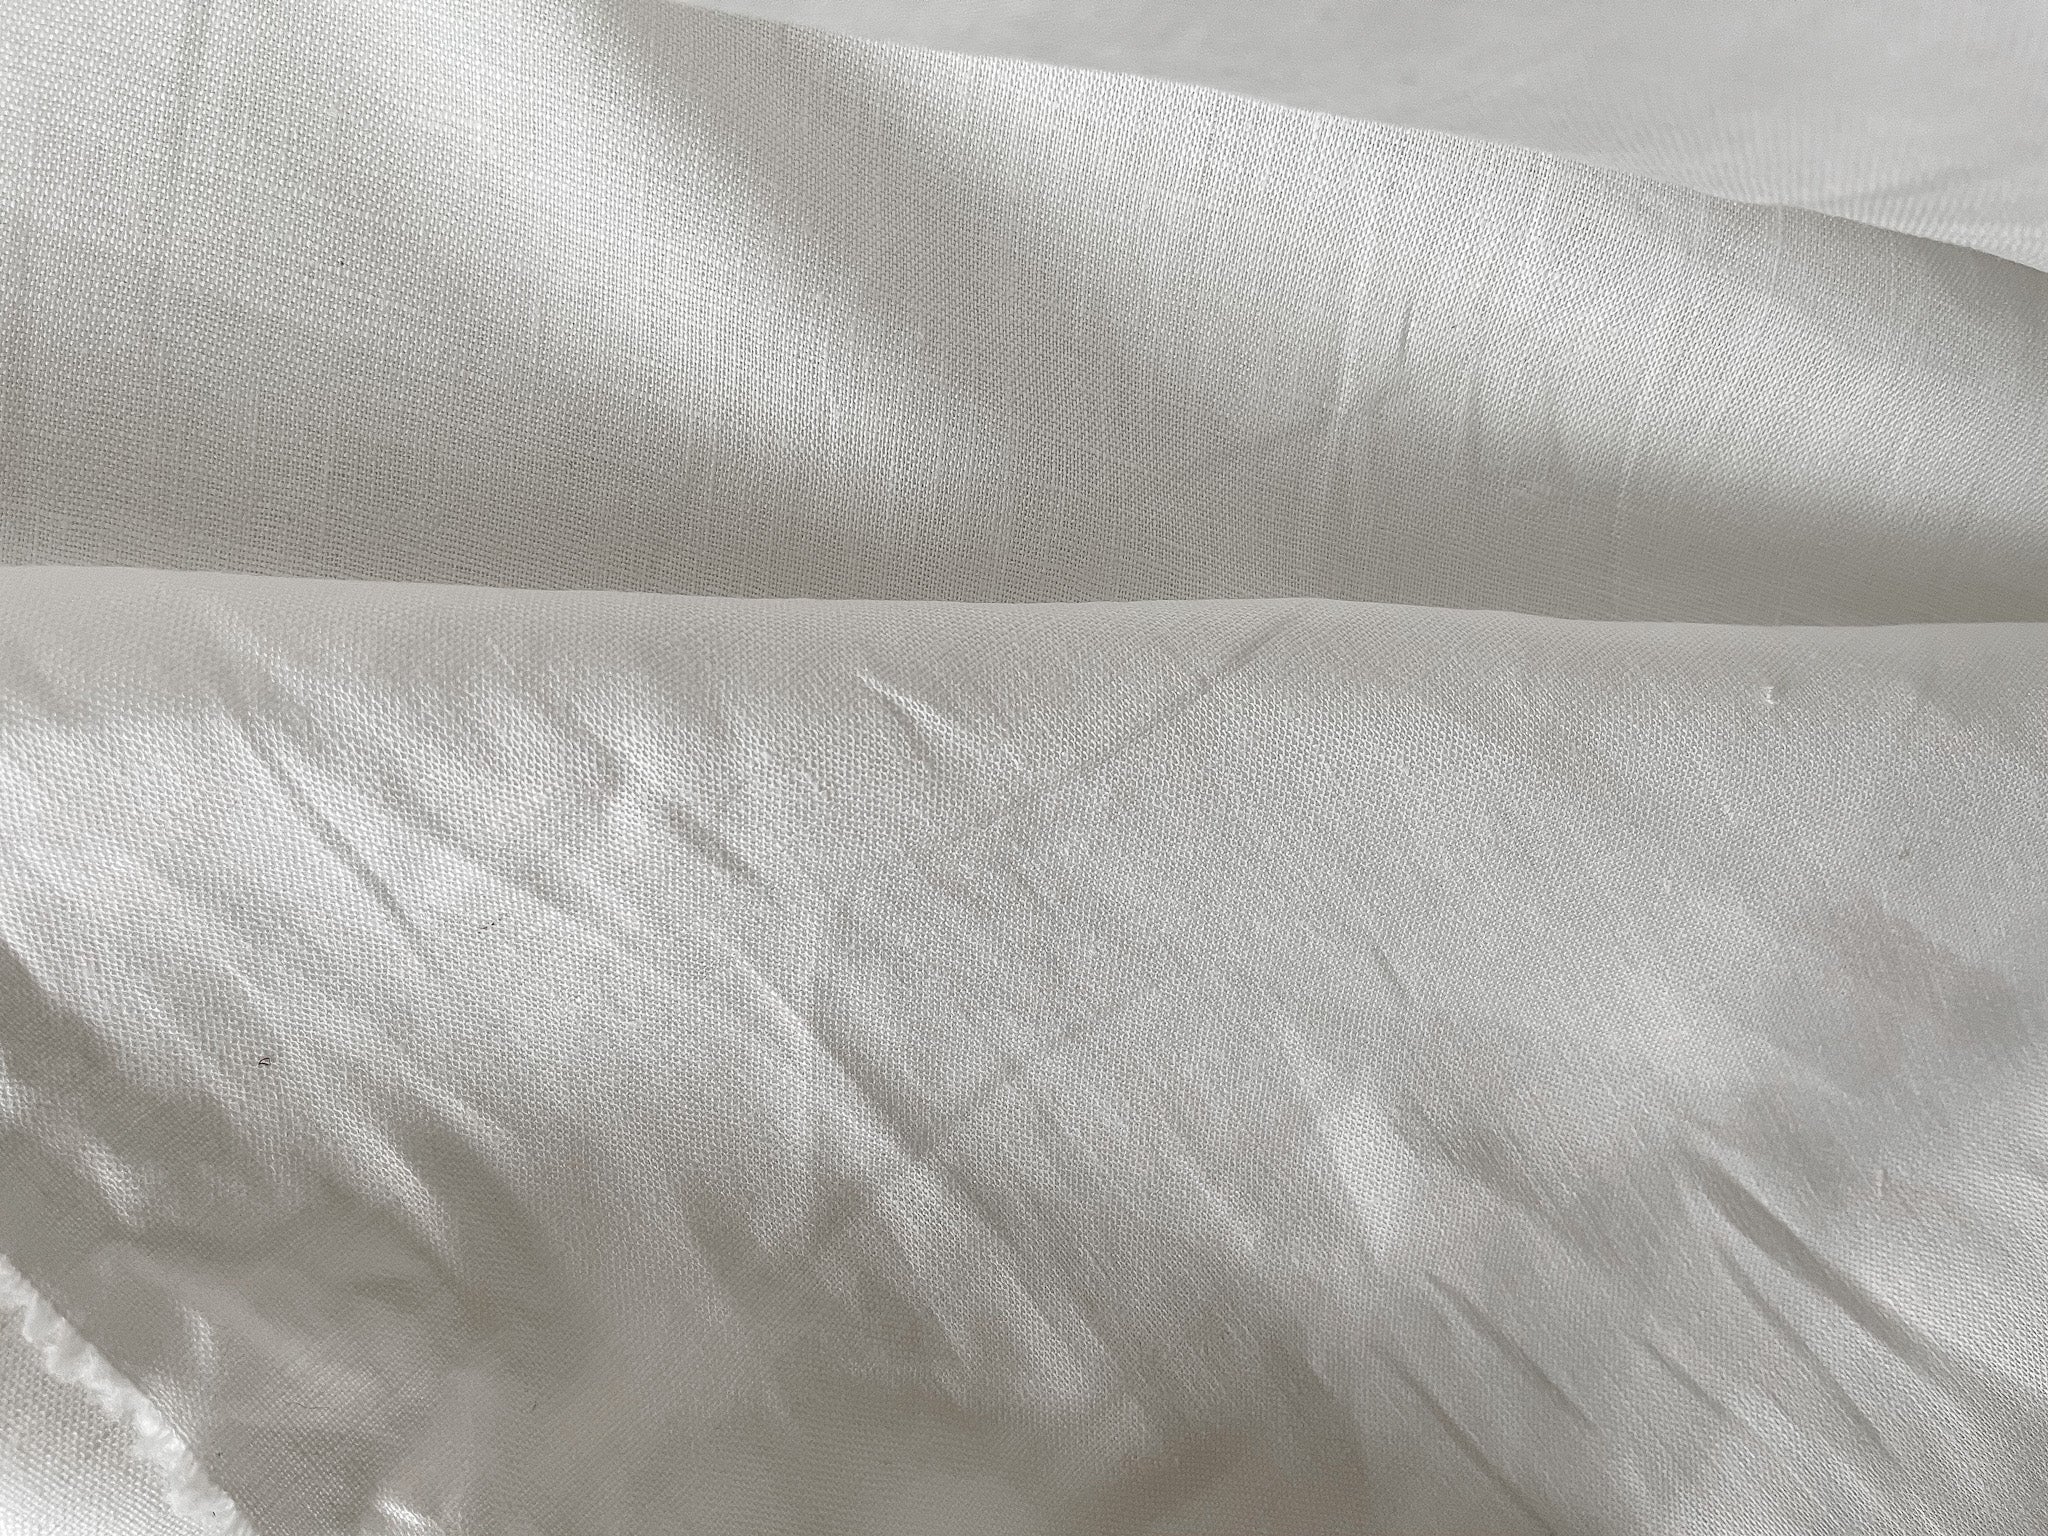 Off-White Linen Fabric - Unfinished